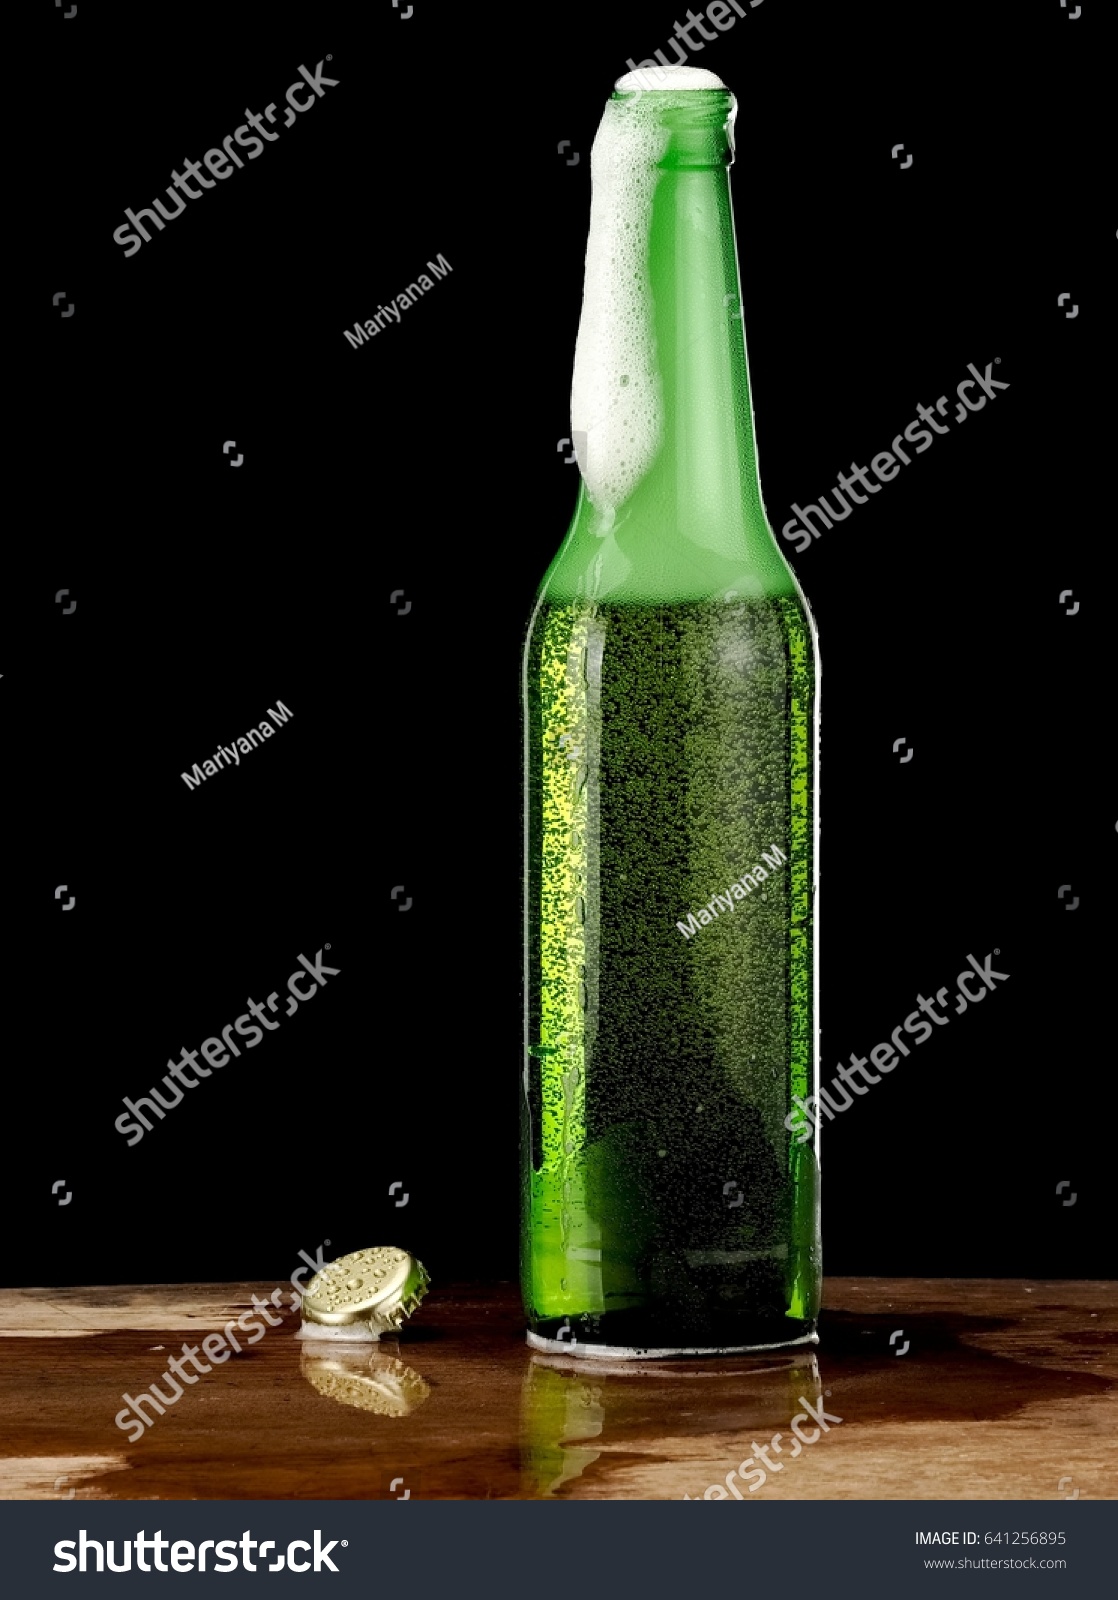 Download Opened Green Beer Bottle Bubbles Foam Food And Drink Stock Image 641256895 PSD Mockup Templates